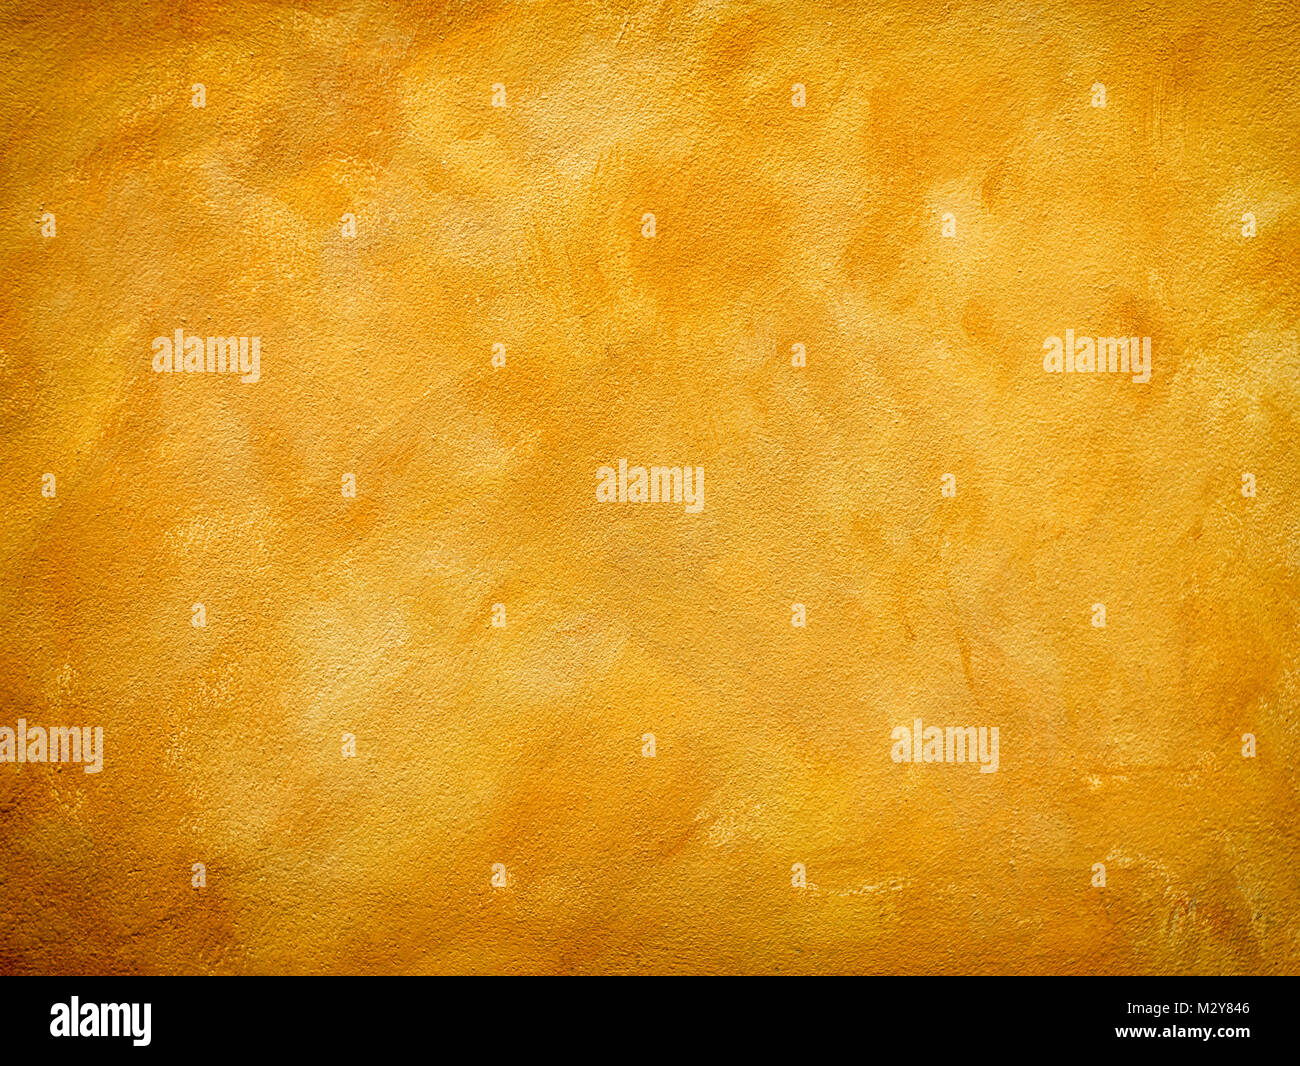 Yellow Grunge Cement Wall Textured Paint Background Stock Photo